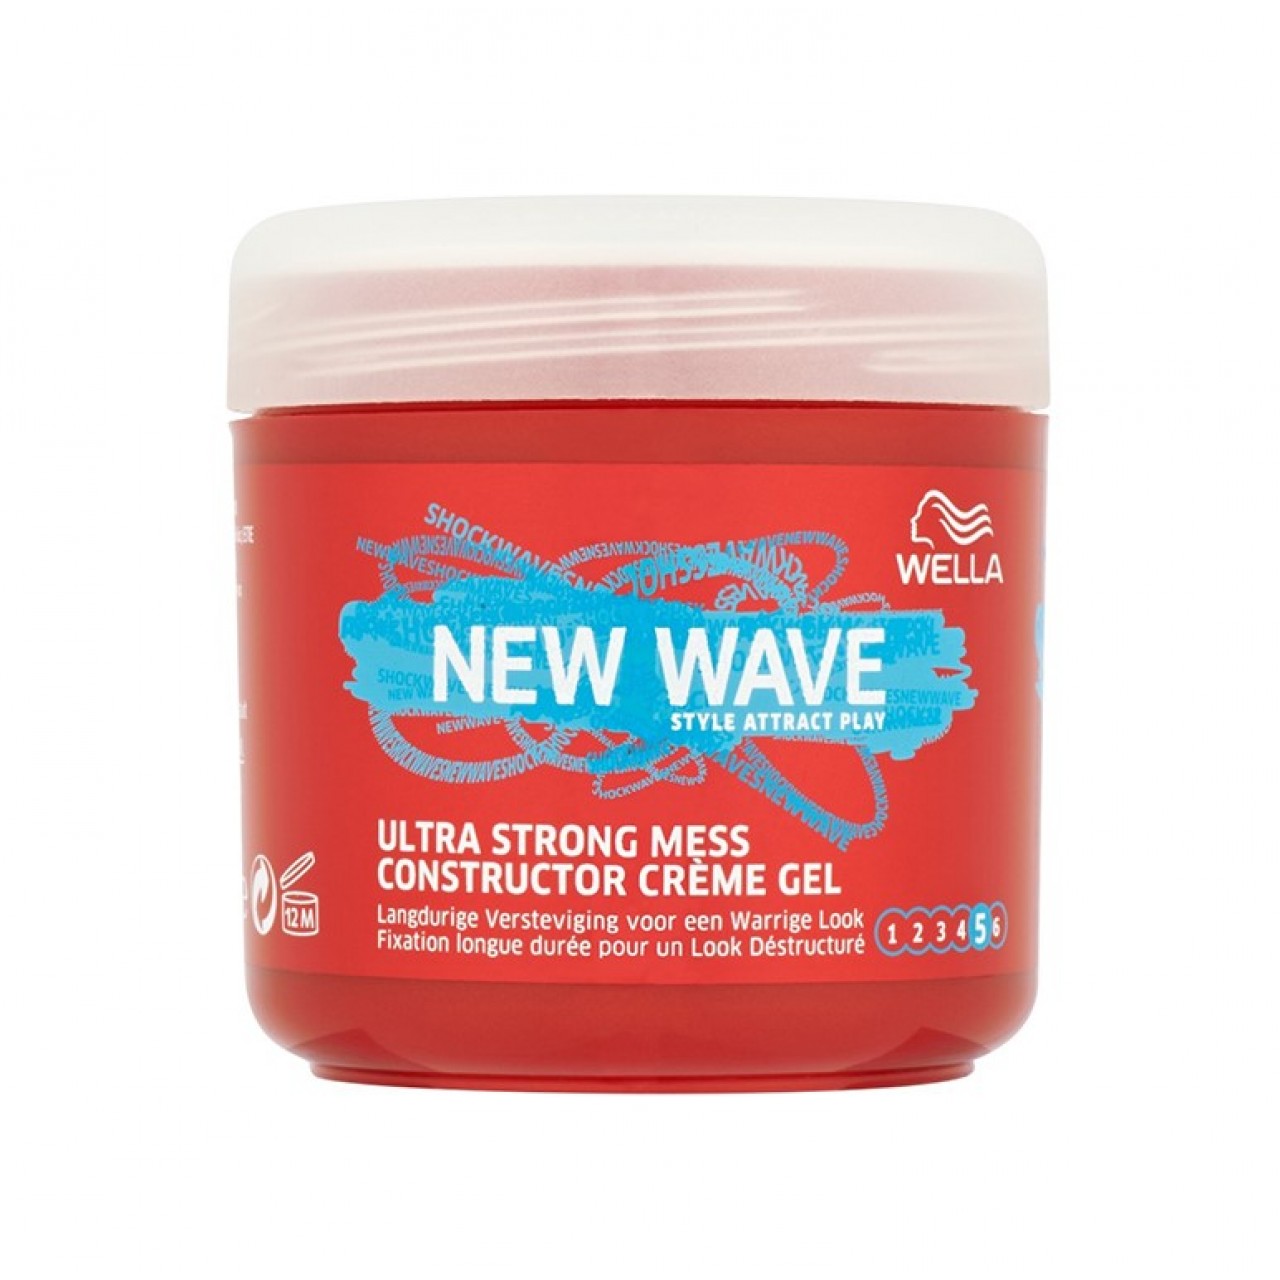 WELLA NEW WAVE GEL ΜΑΛΛΙΩΝ 150ml ULTRA STRONG POWER - 6533